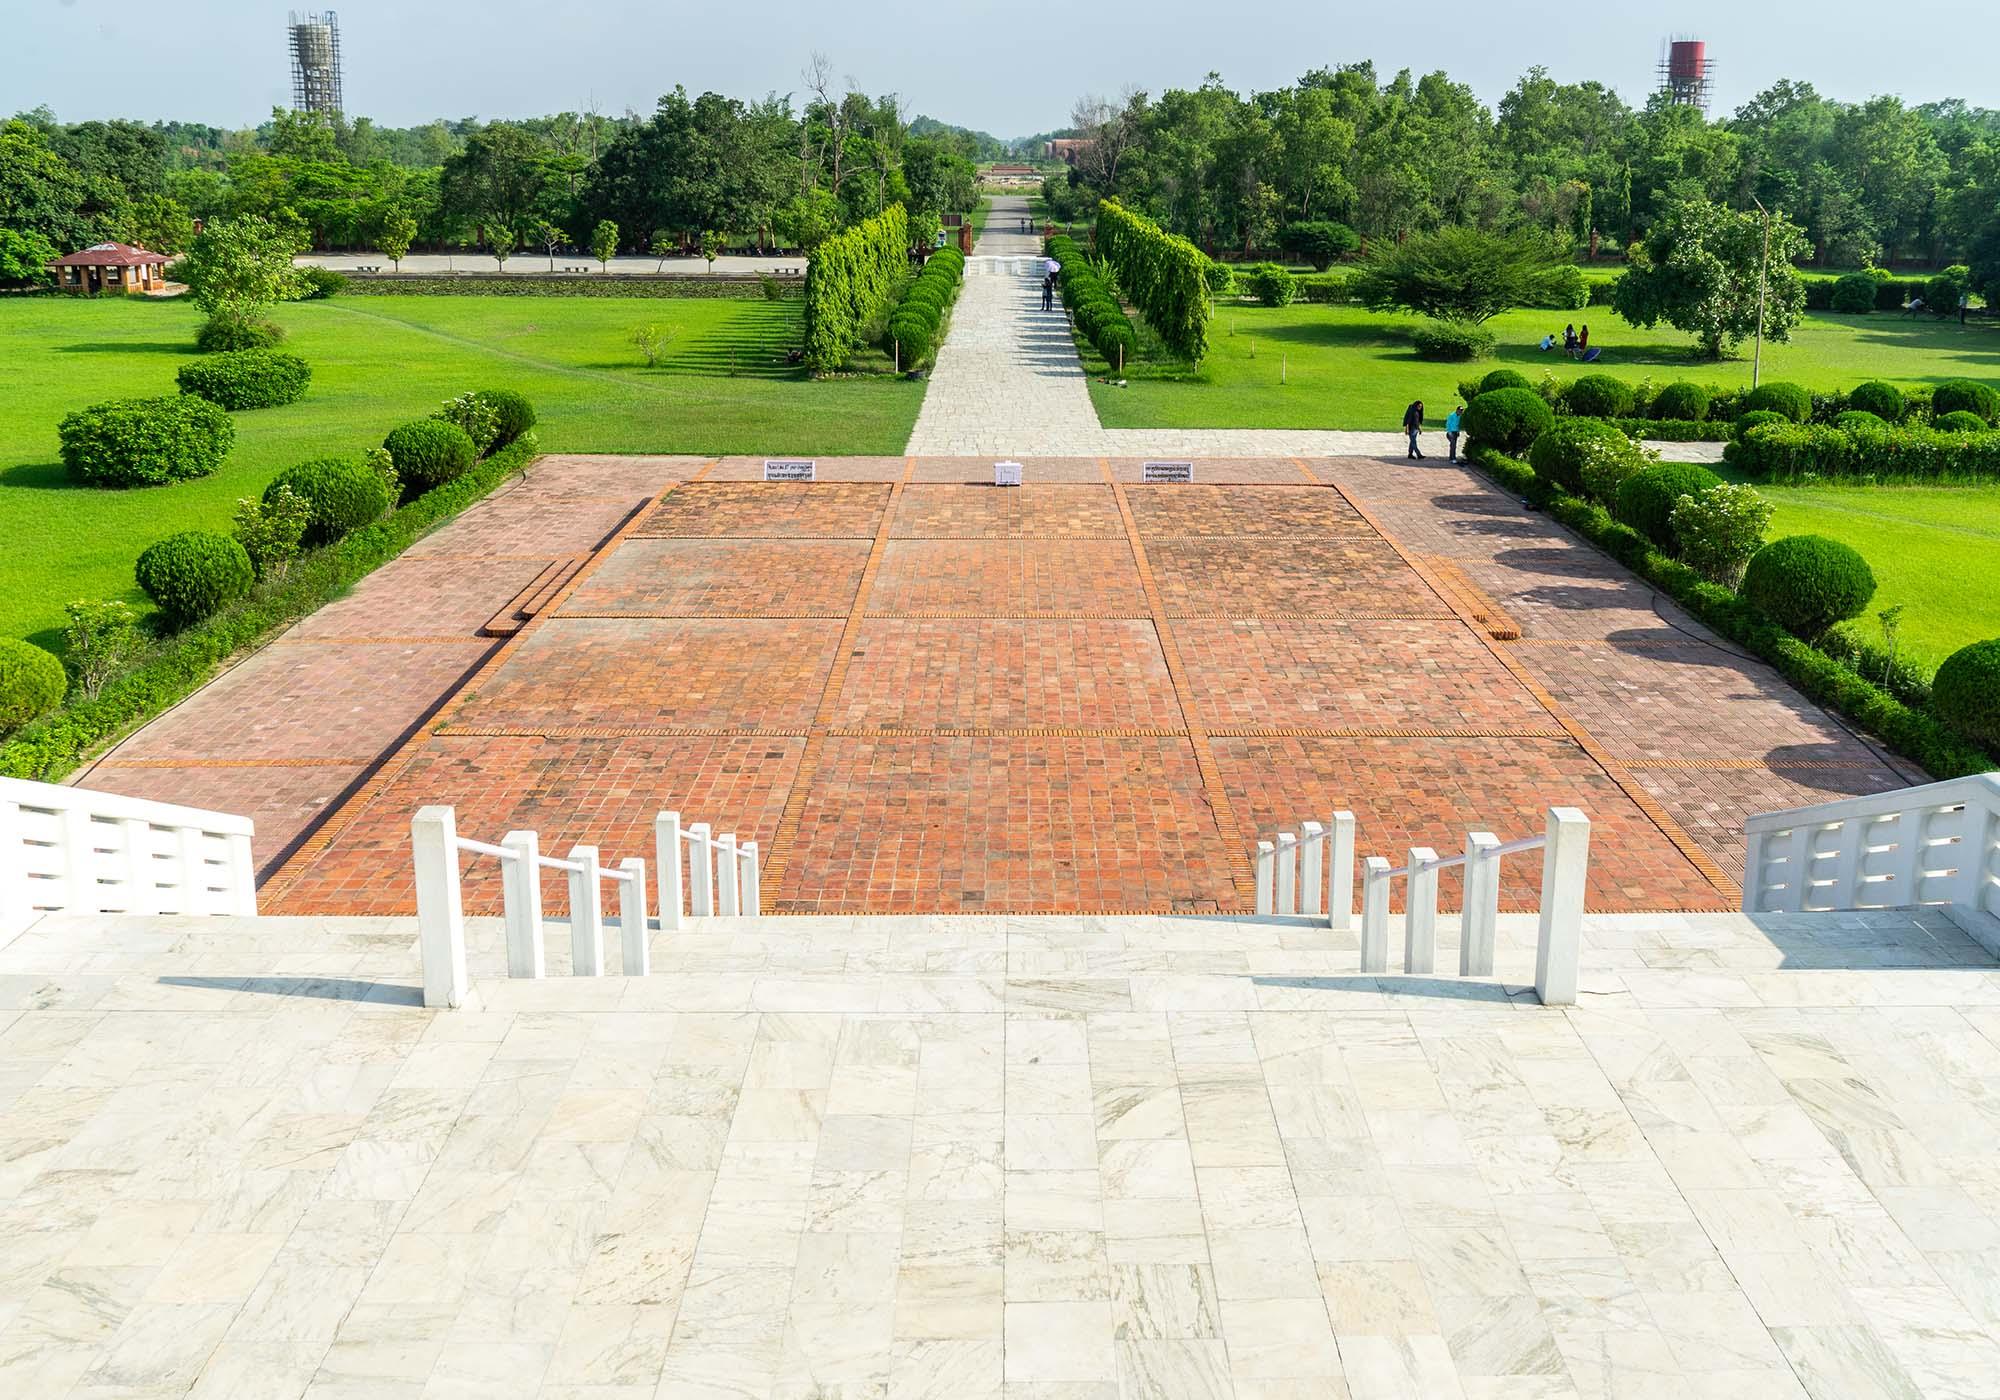 The view from the World Peace Pagoda down the central axis towards the Mayadevi Temple in the middle of the Sacred Garden. – © Michael Turtle